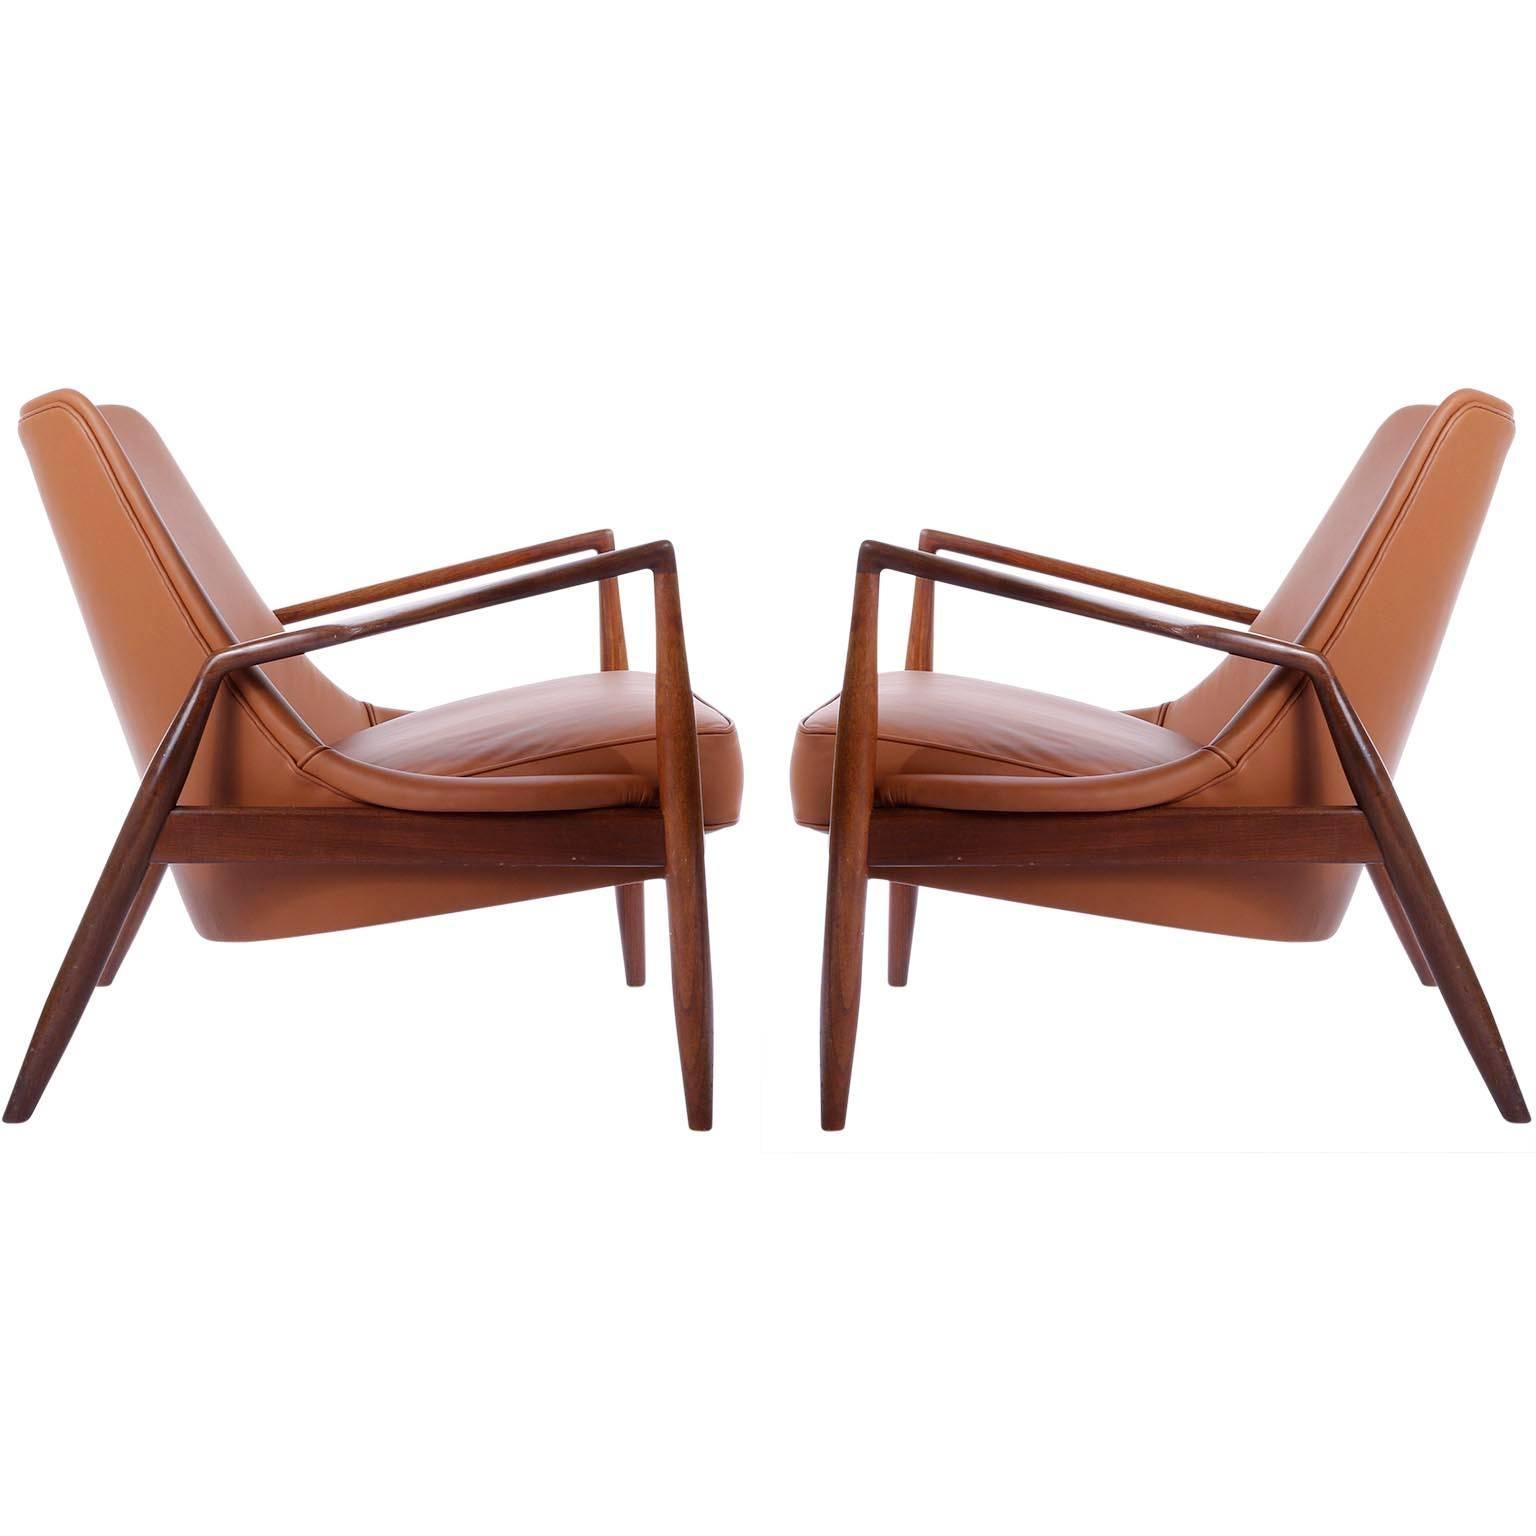 A stunning pair of Sälen (engl. Seal) easy chairs in solid teak and wonderful cognac leather, designed by Ib Kofod Larsen, manufactured by OPE Sweden in midcentury, circa 1956. 
This extremely rare model will be offered as set of two. Both chairs